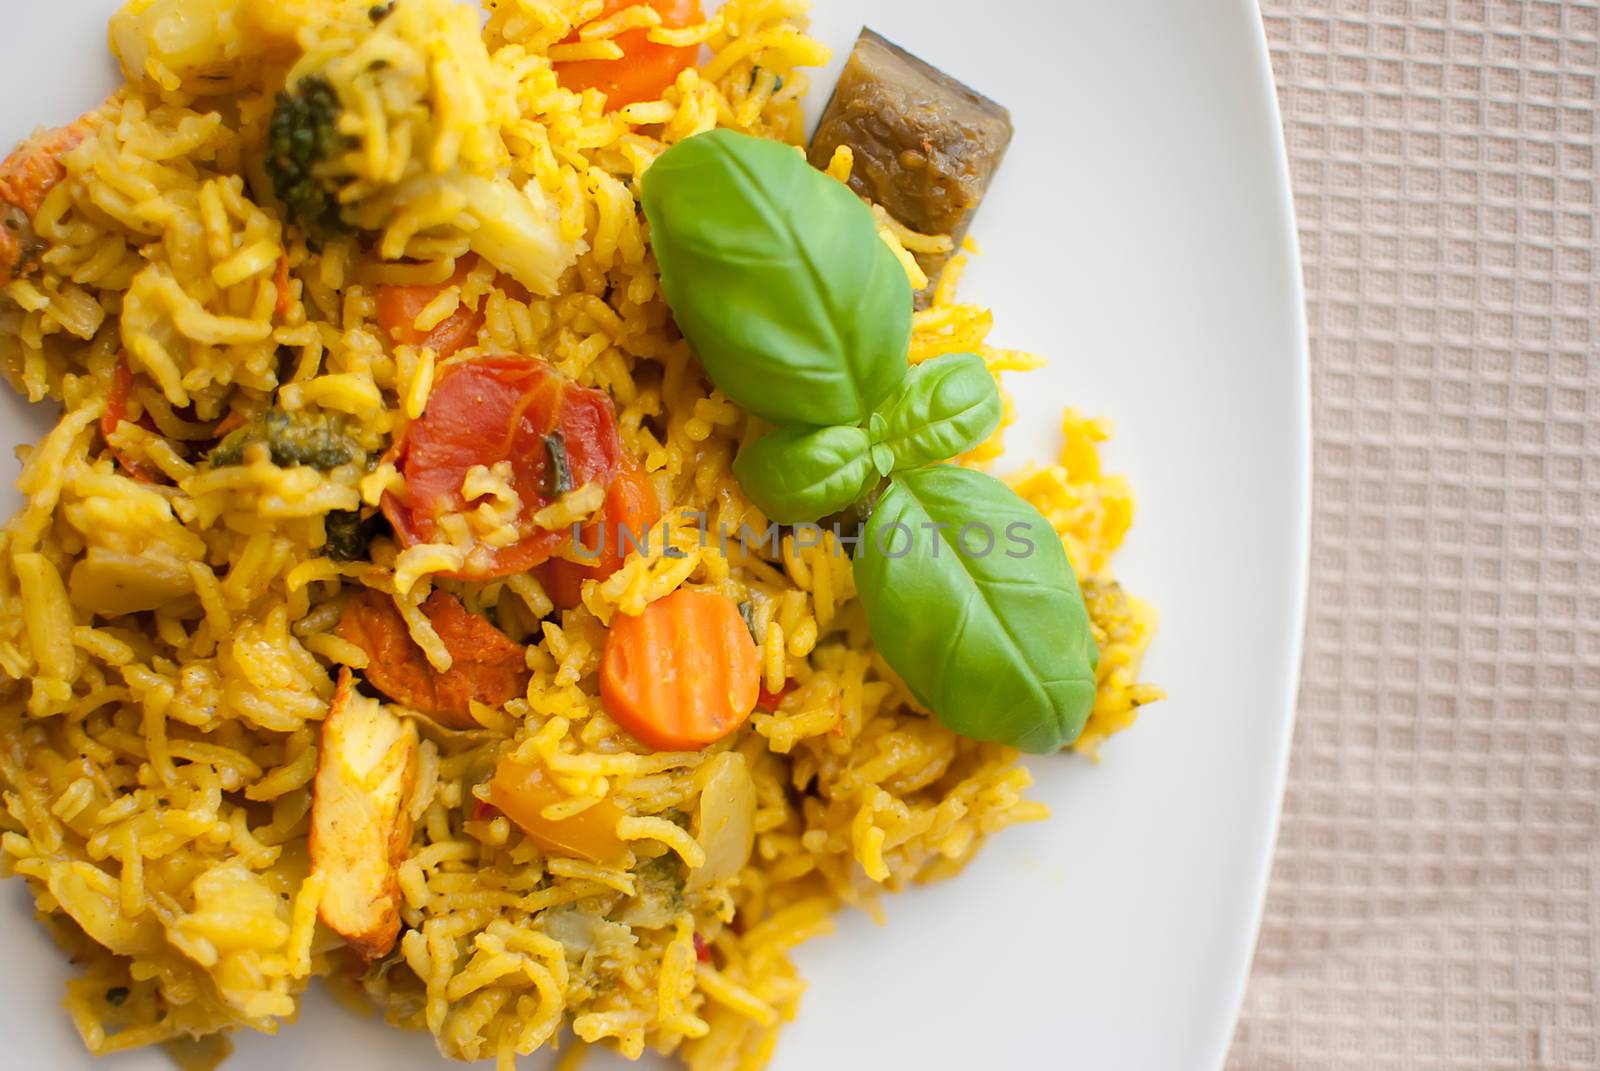 basmati rice with vegetables and chicken by Dessie_bg